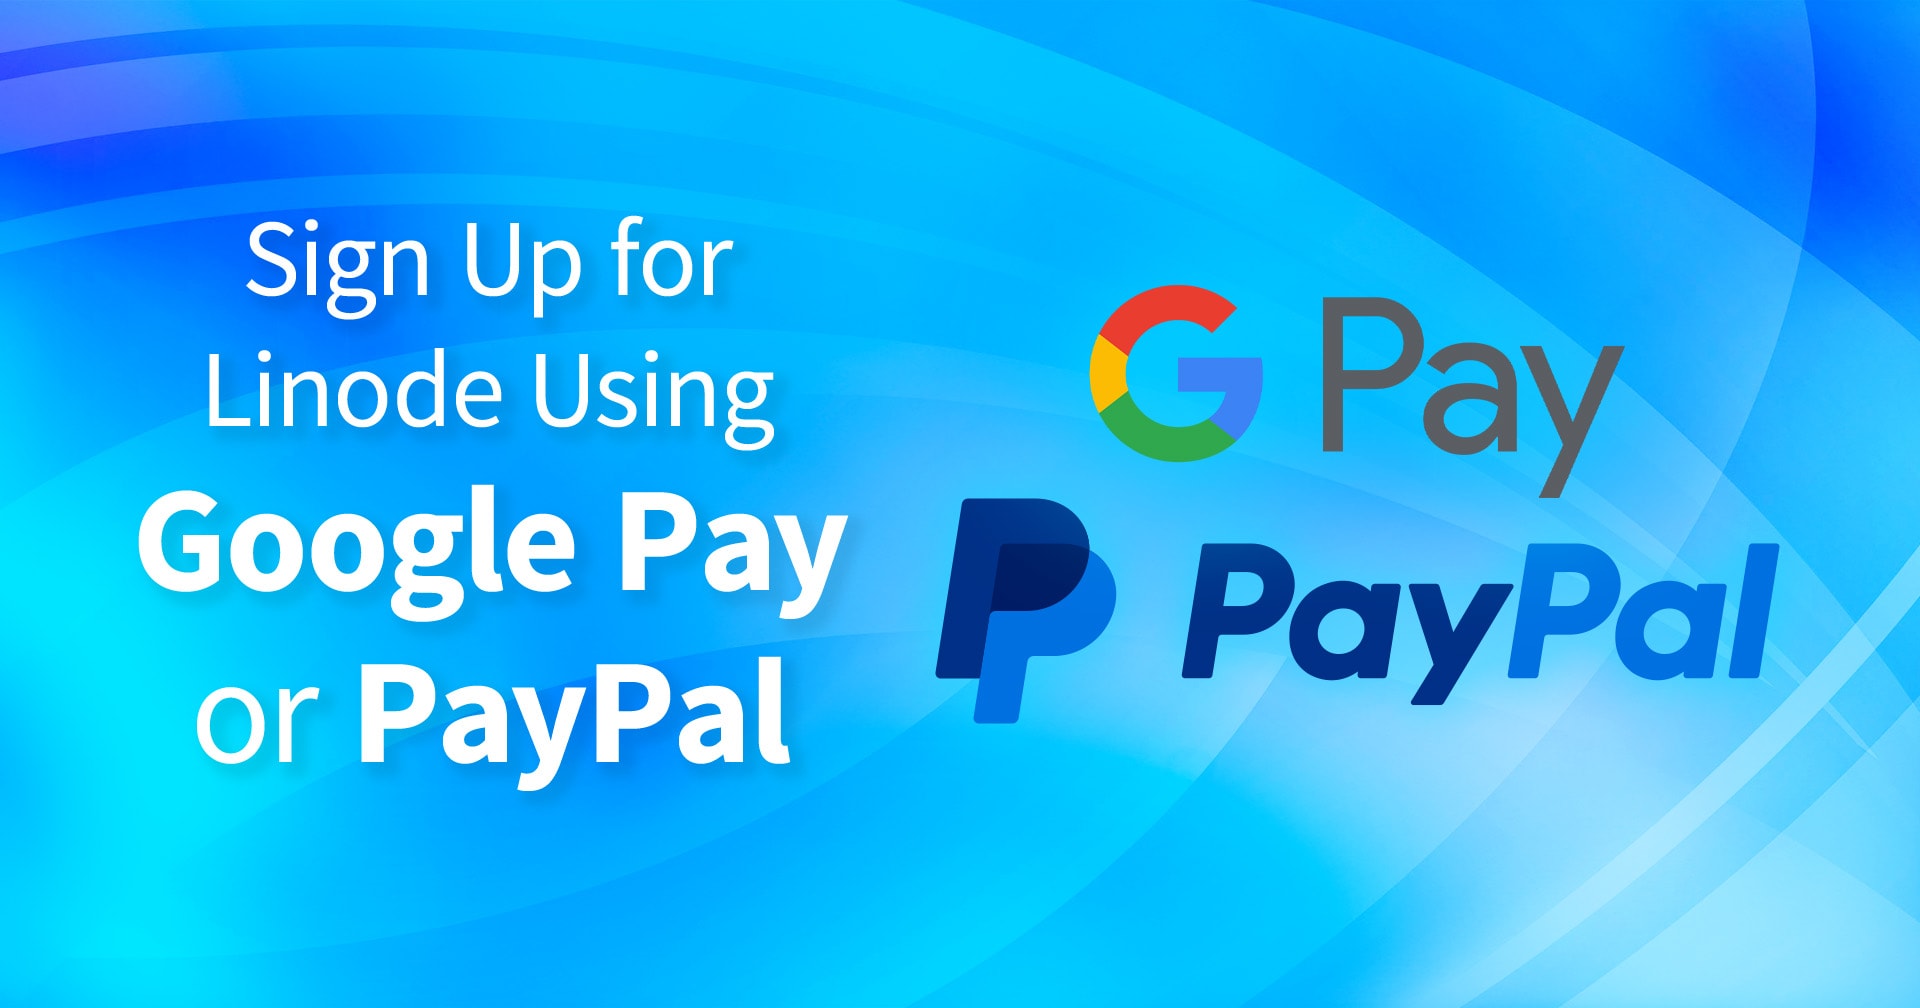 Sign-Up-for-Linode-Using-Google-Pay-or-PayPal